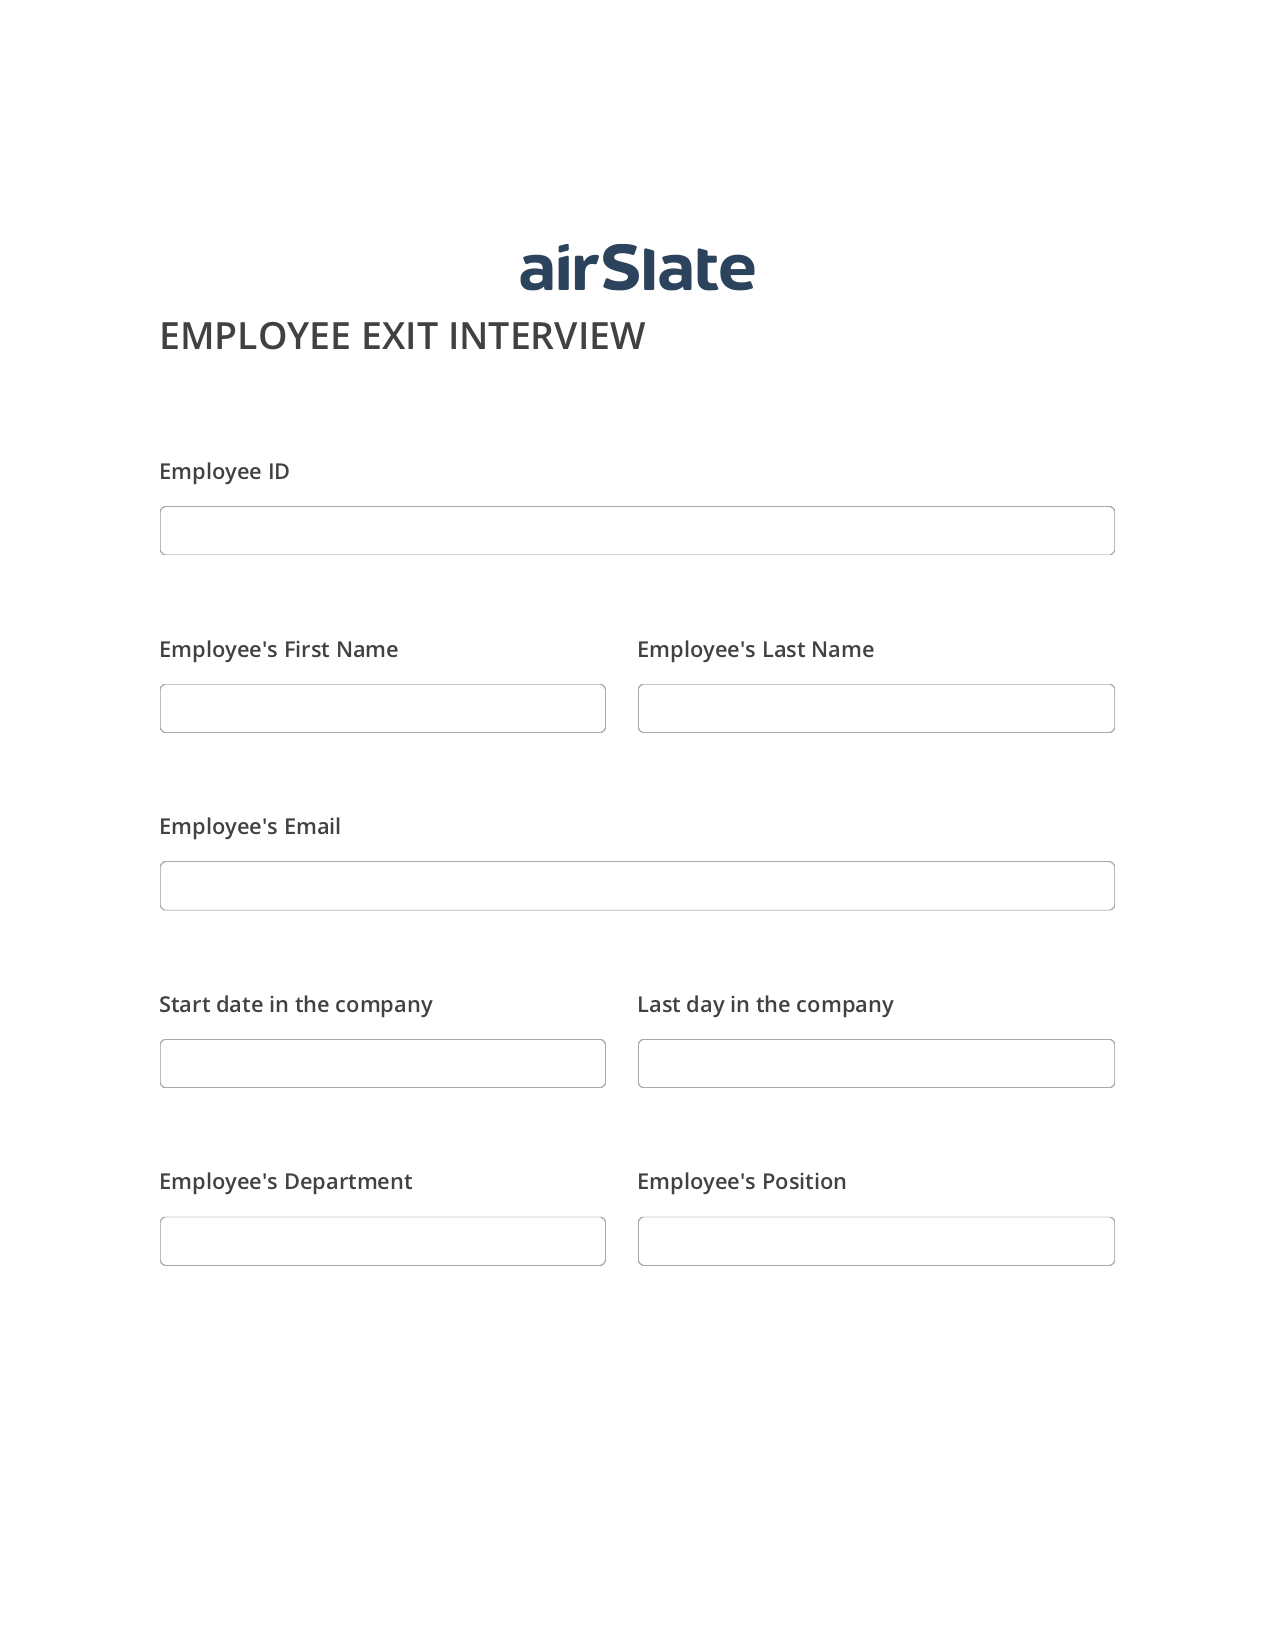 Employee Exit Interview Workflow Pre-fill Slate from MS Dynamics 365 Records Bot, Mailchimp add recipient to audience Bot, Export to Salesforce Bot